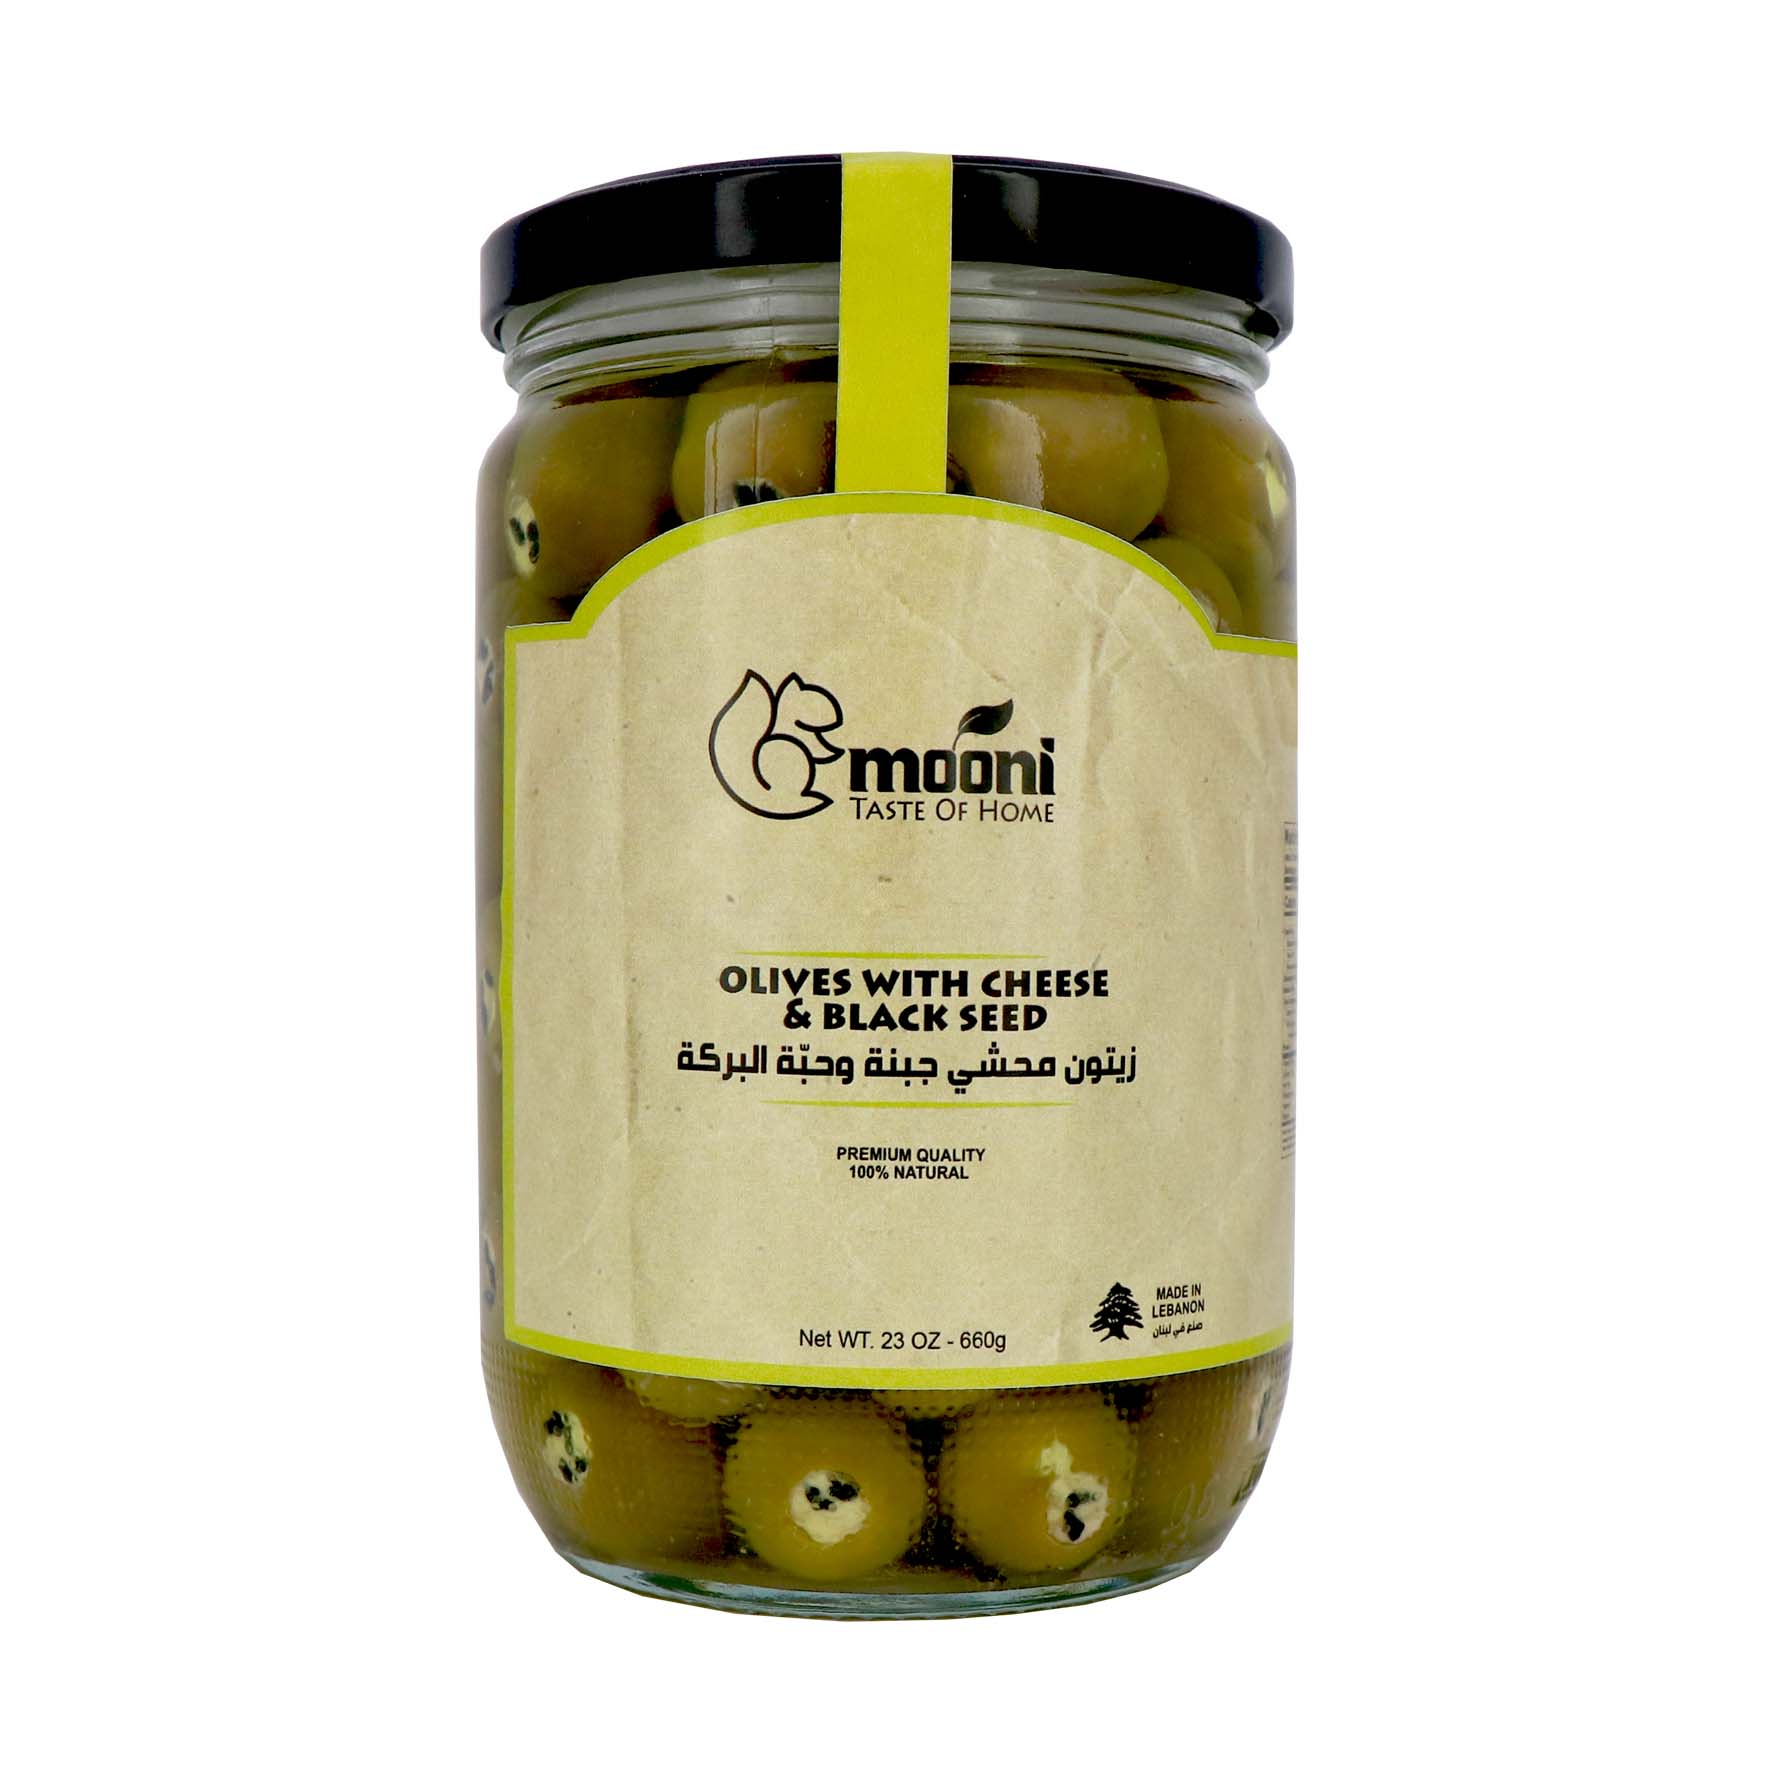 Stuffed Olives With Cheese & Black Seed – 660g